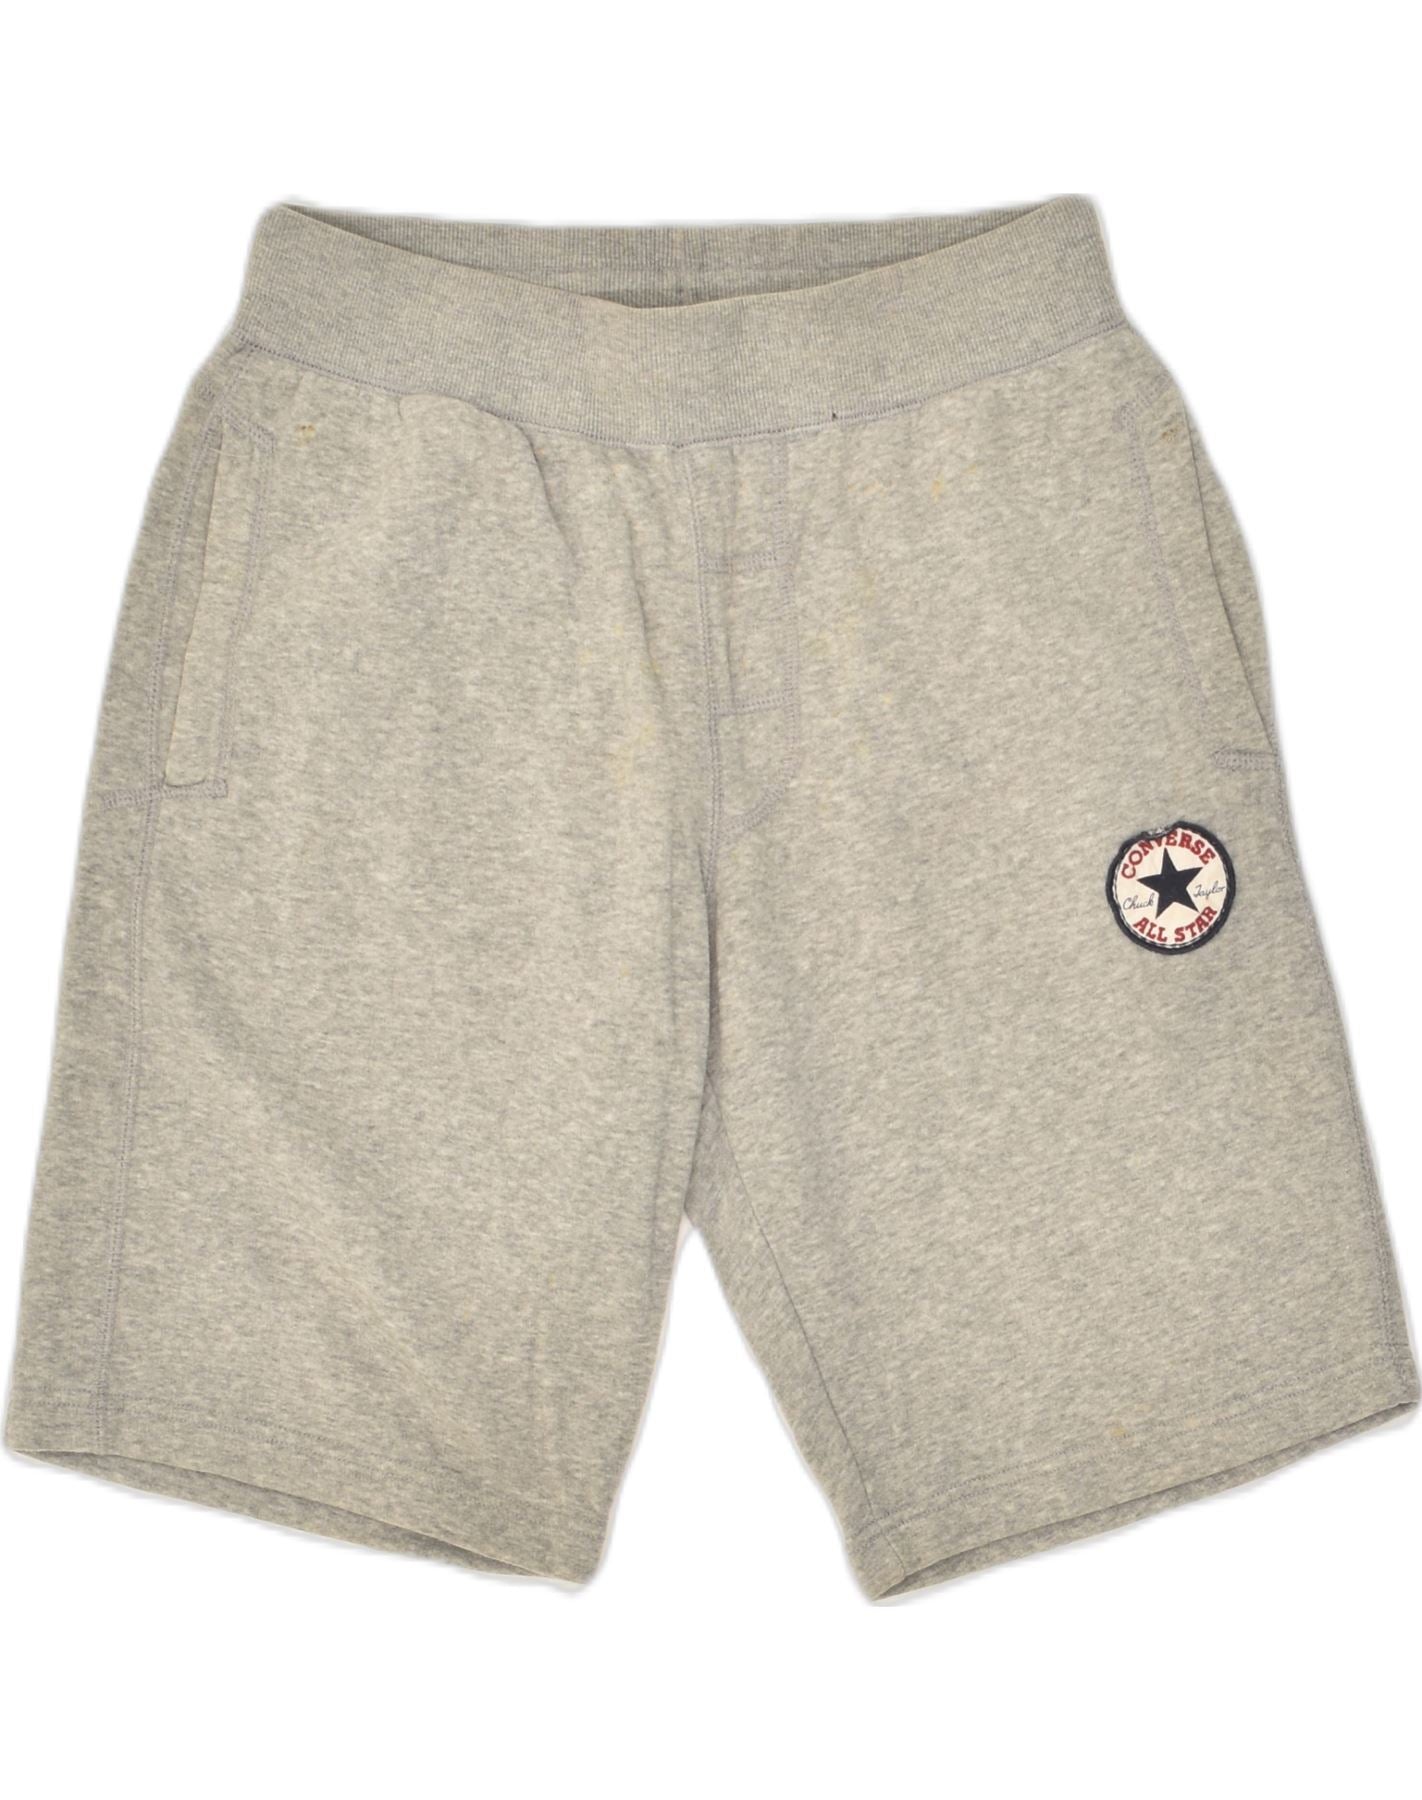 CONVERSE Mens Sport Shorts Small Grey Cotton, Vintage & Second-Hand  Clothing Online